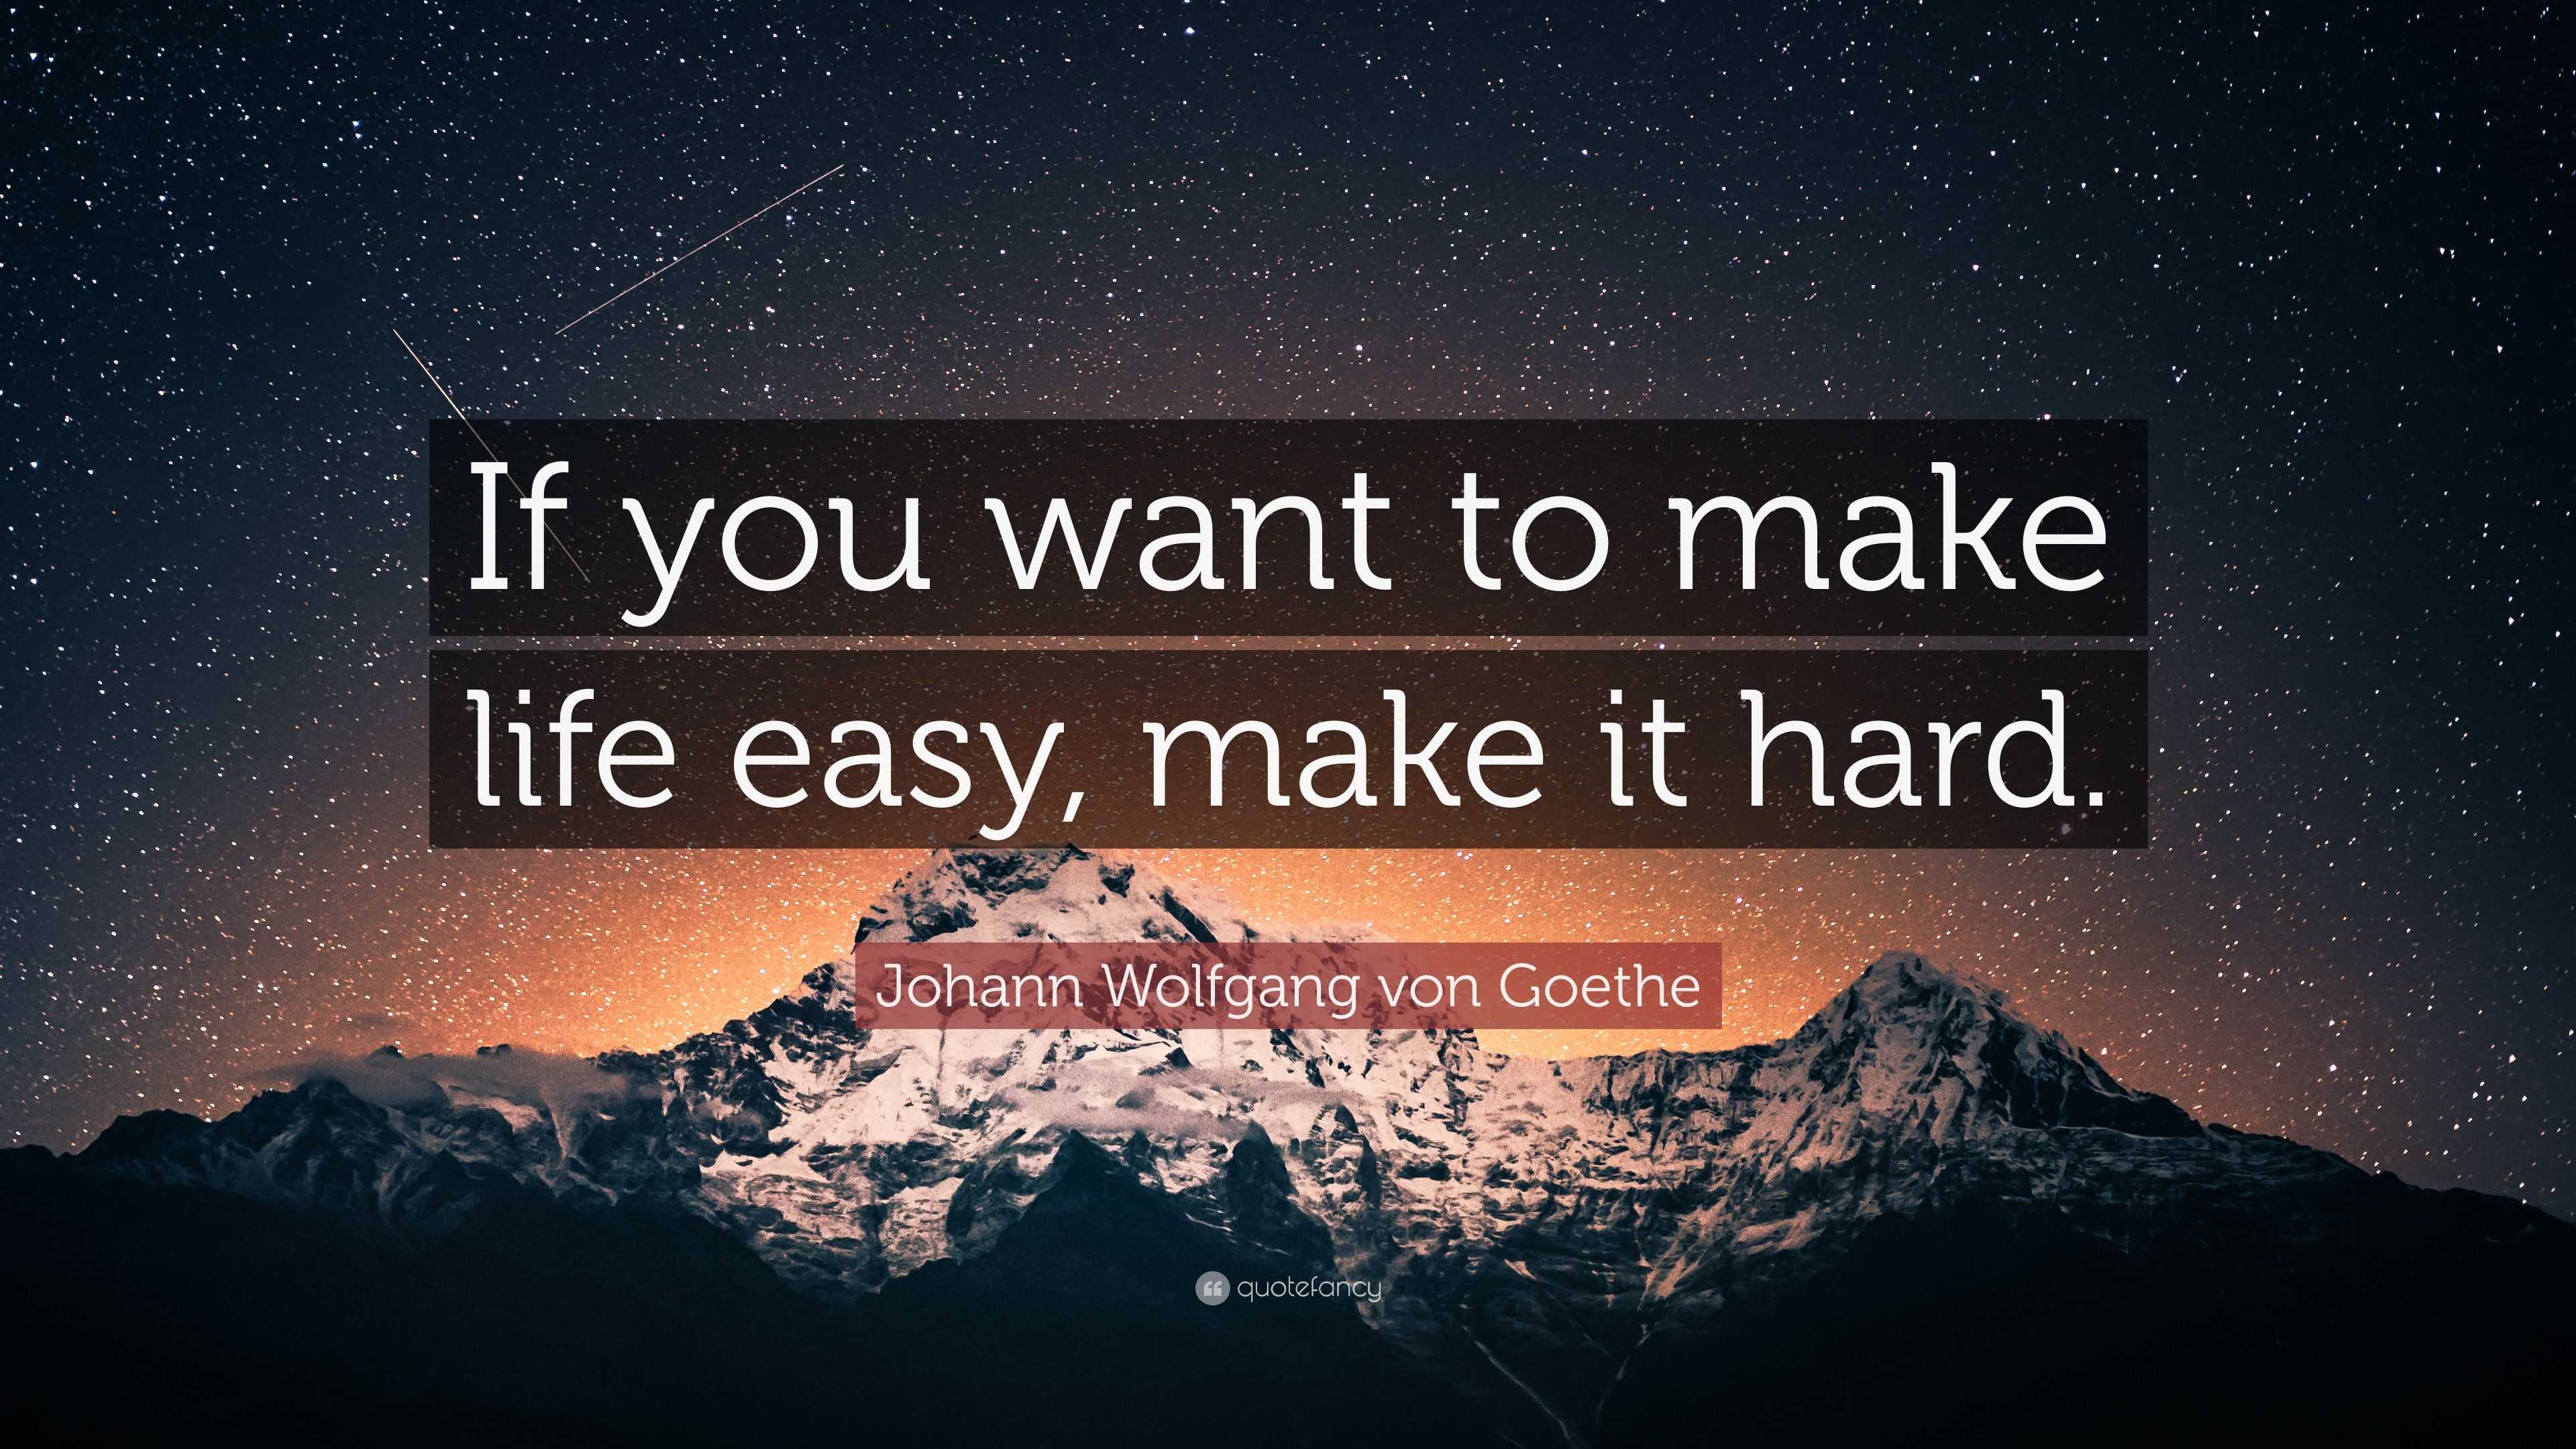 https://quotefancy.com/media/wallpaper/3840x2160/4698596-Johann-Wolfgang-von-Goethe-Quote-If-you-want-to-make-life-easy.jpg